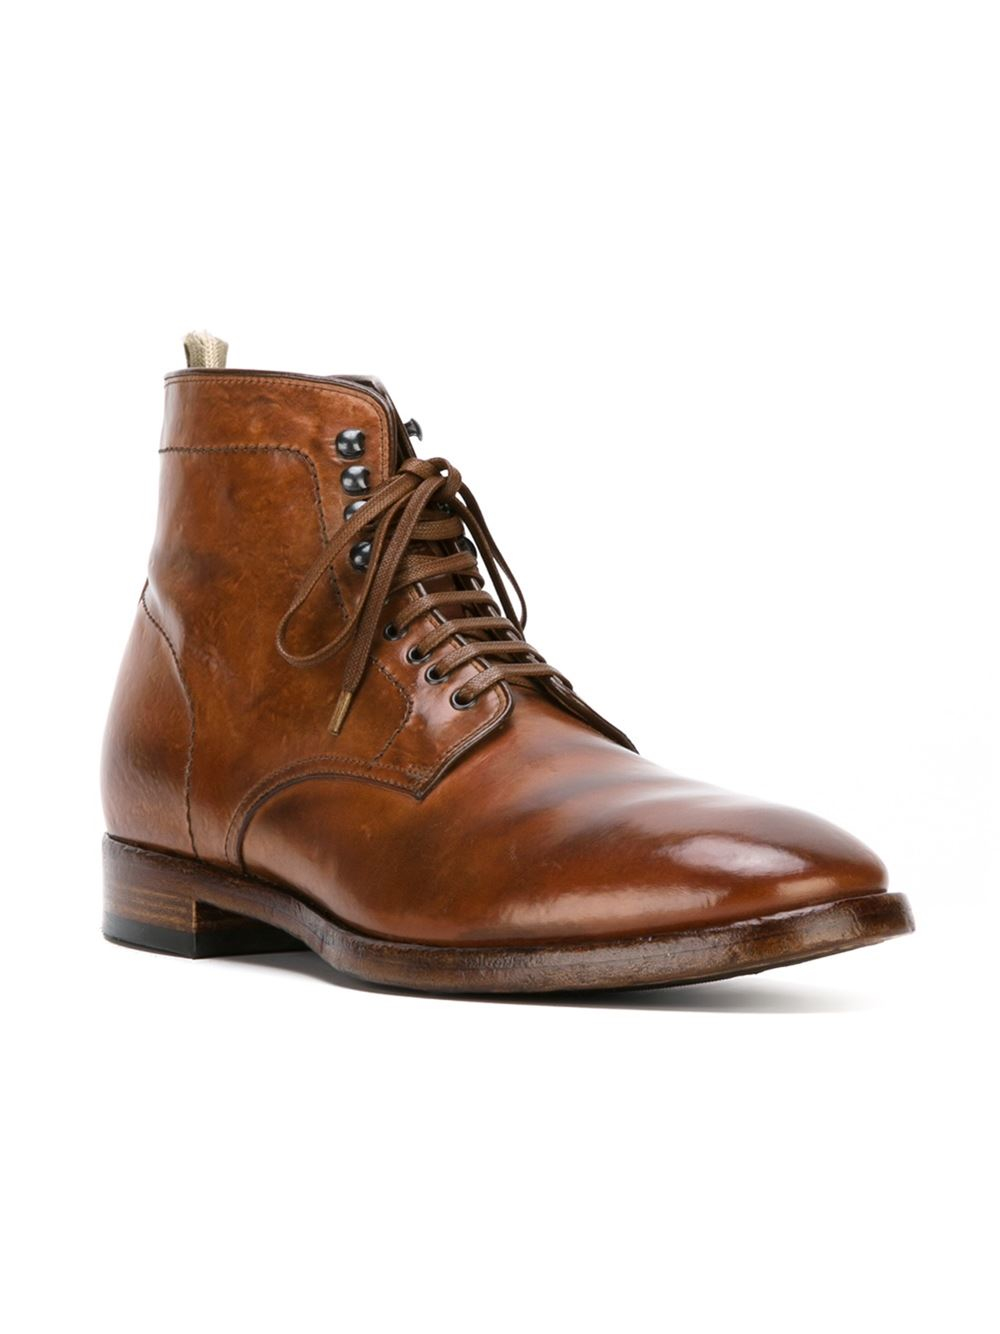 Officine creative 'princeton' Boots in Brown for Men | Lyst